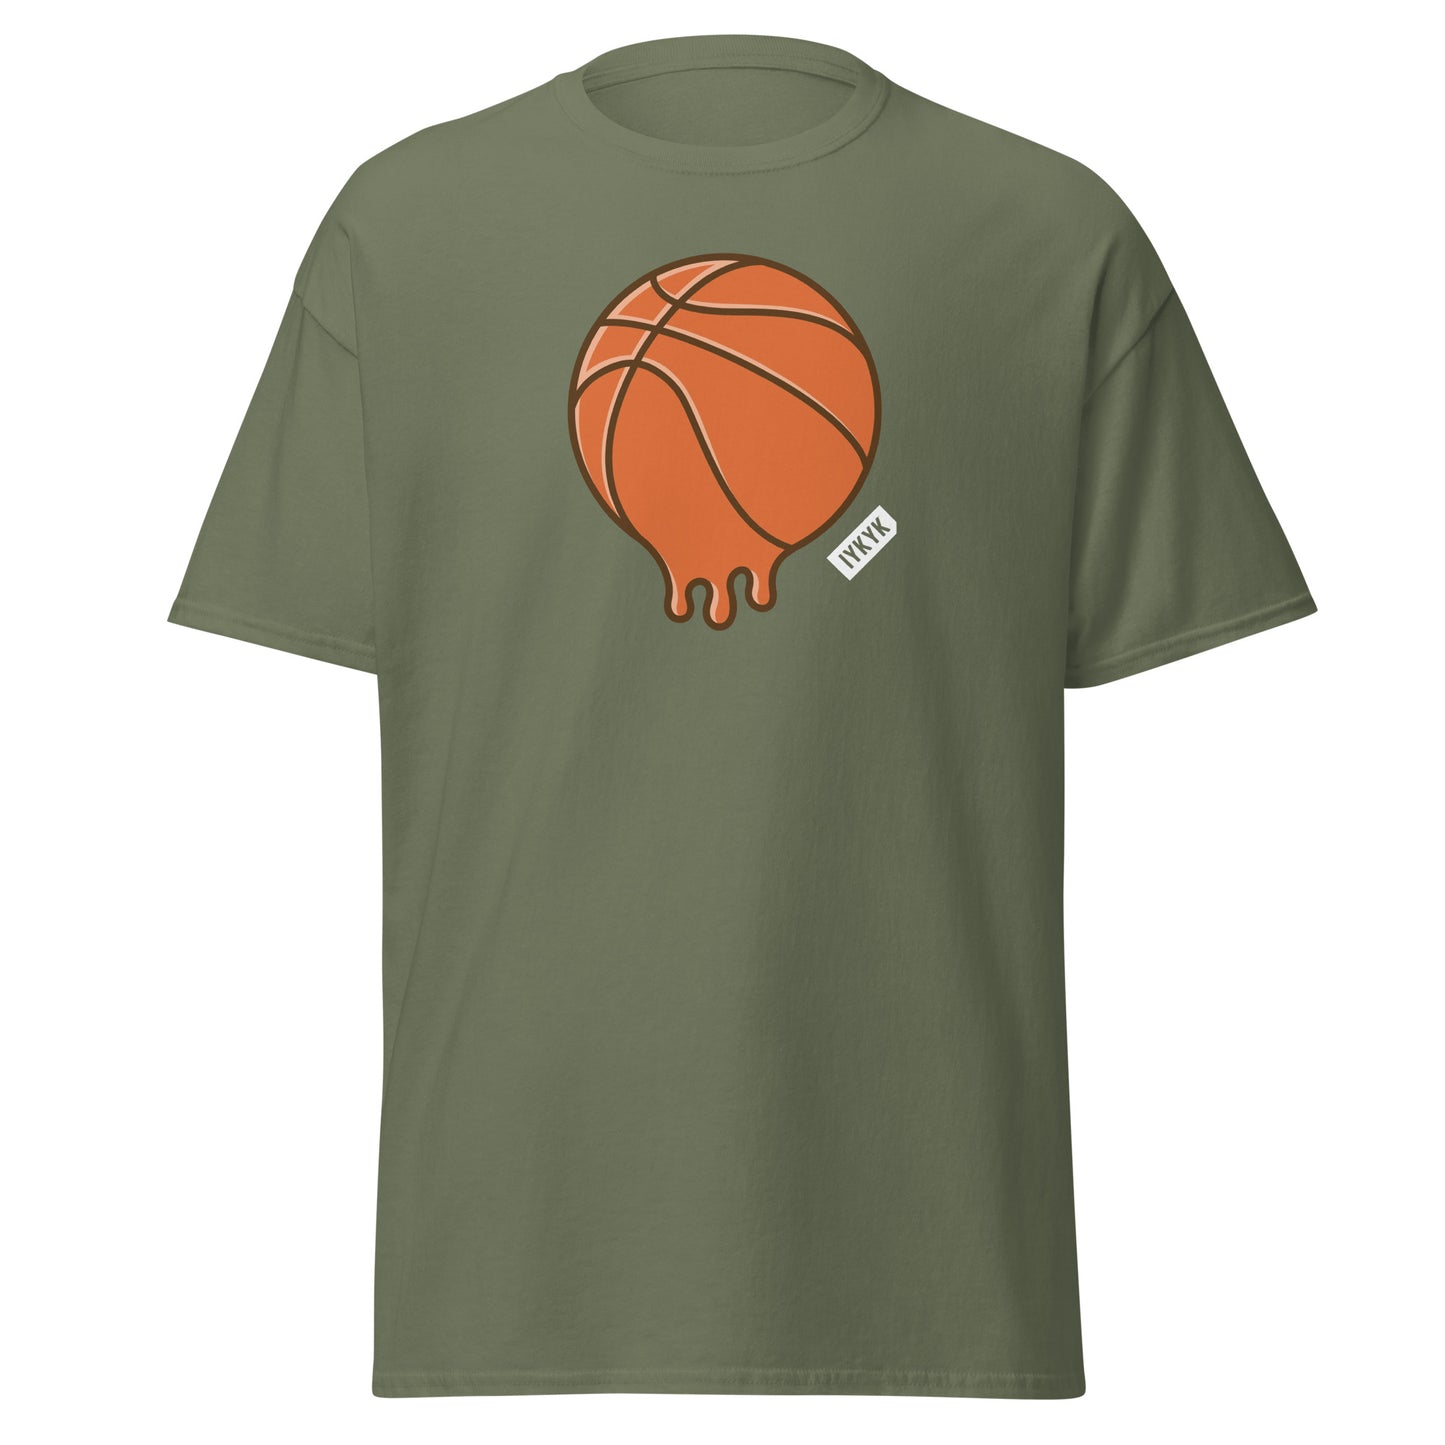 Classic Everyday Melting Basketball Just For Fun Tee